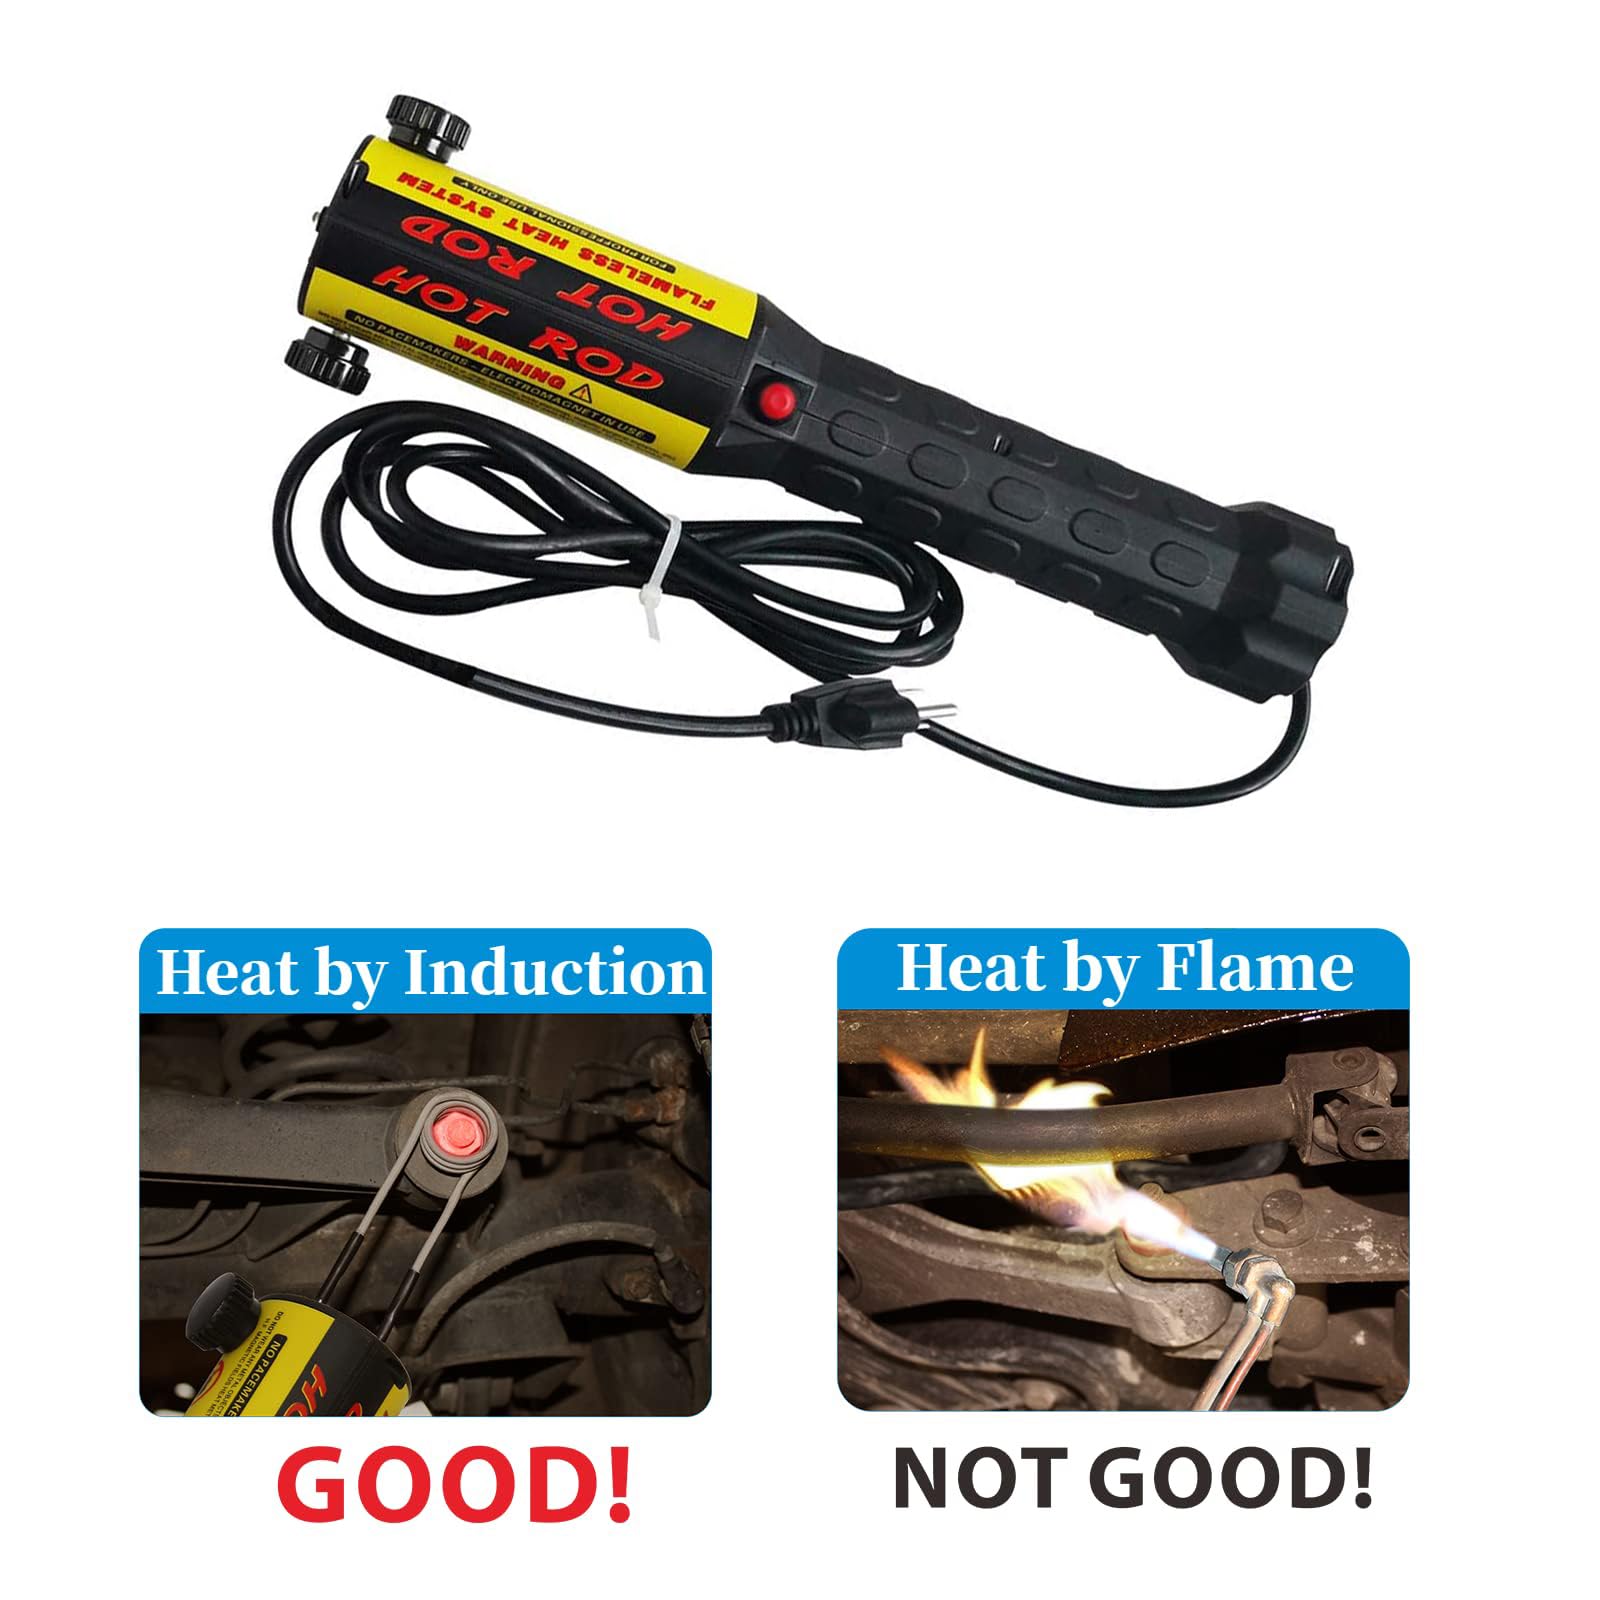 Solary Magnetic Induction Heater, Flameless Handhled Bolts Heating Removel Tool with 10 Coils and Portable Tool Box - Auto Body Collision Repair Welding Products